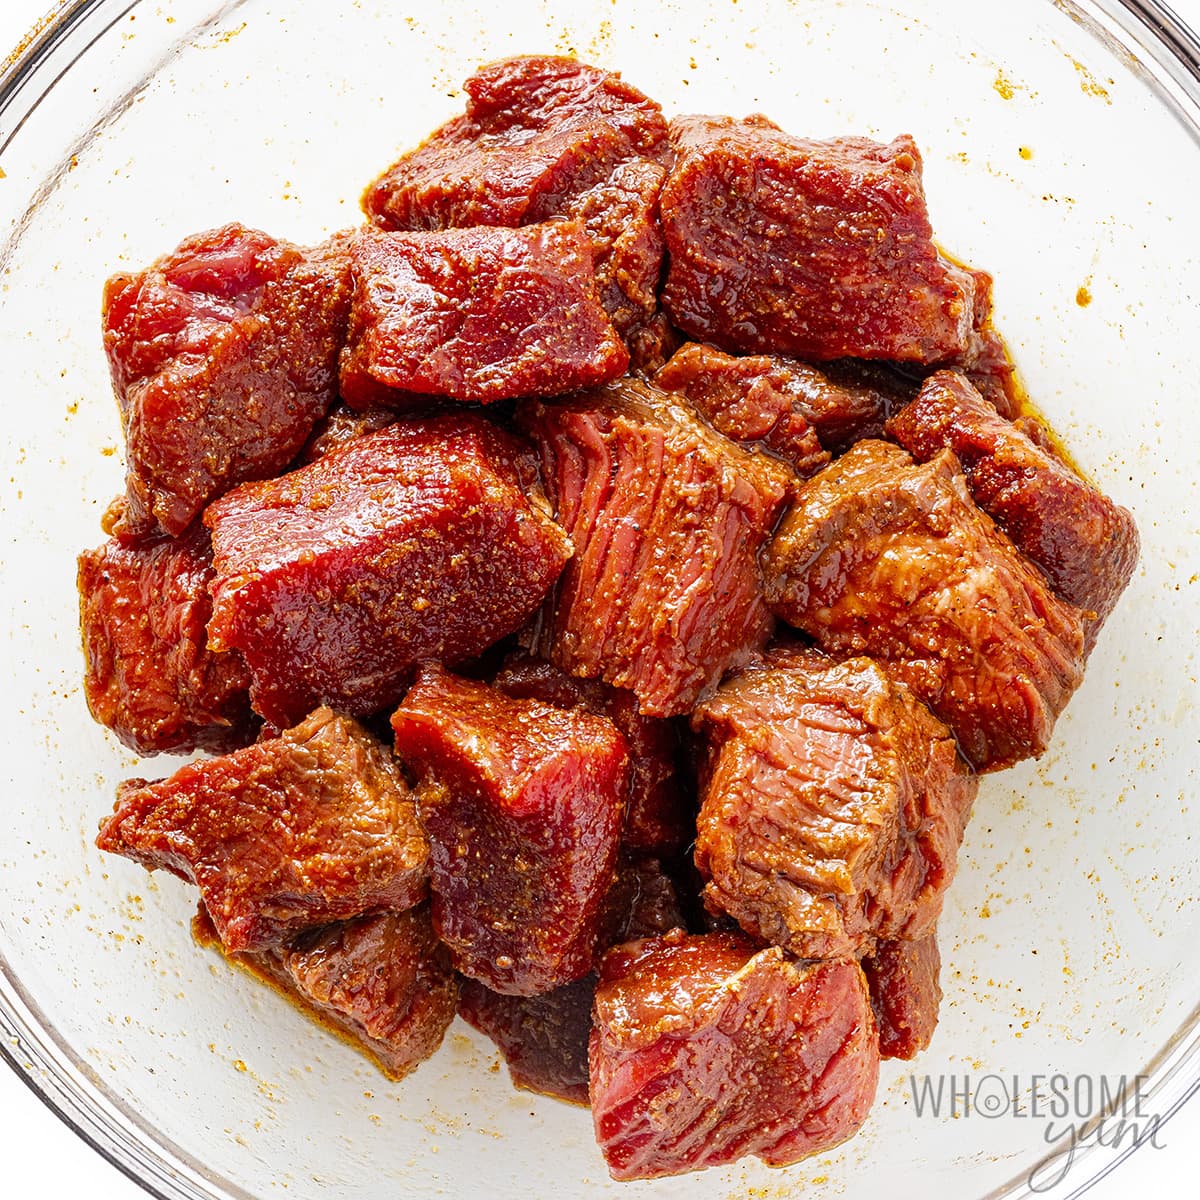 Steak pieces tossed in olive oil and seasonings in a bowl.